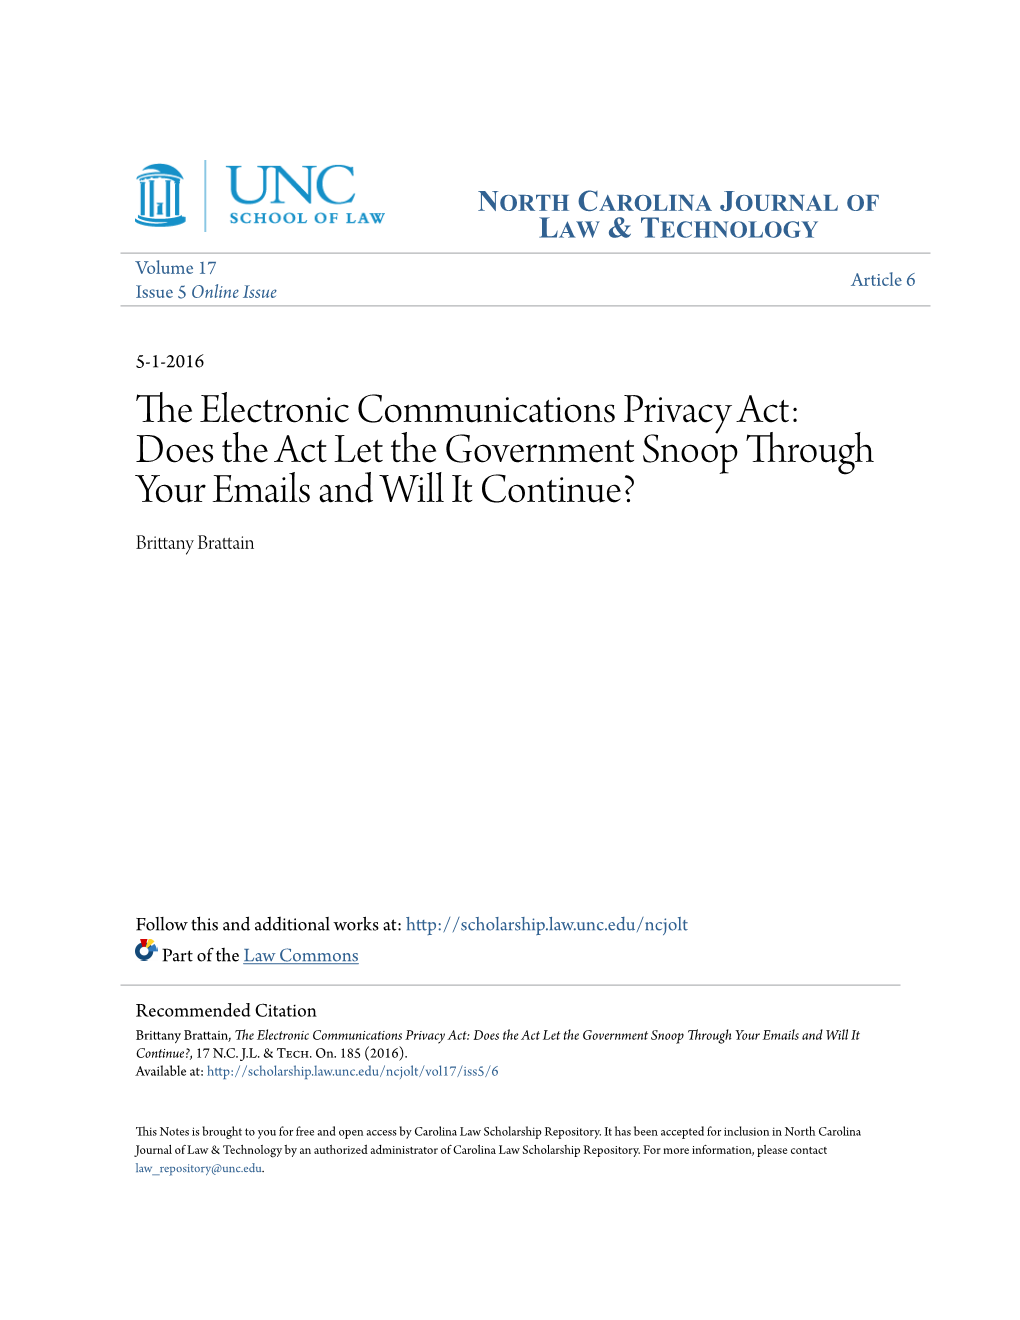 The Electronic Communications Privacy Act: Does the Act Let the Government Snoop Through Your Emails and Will It Continue?, 17 N.C